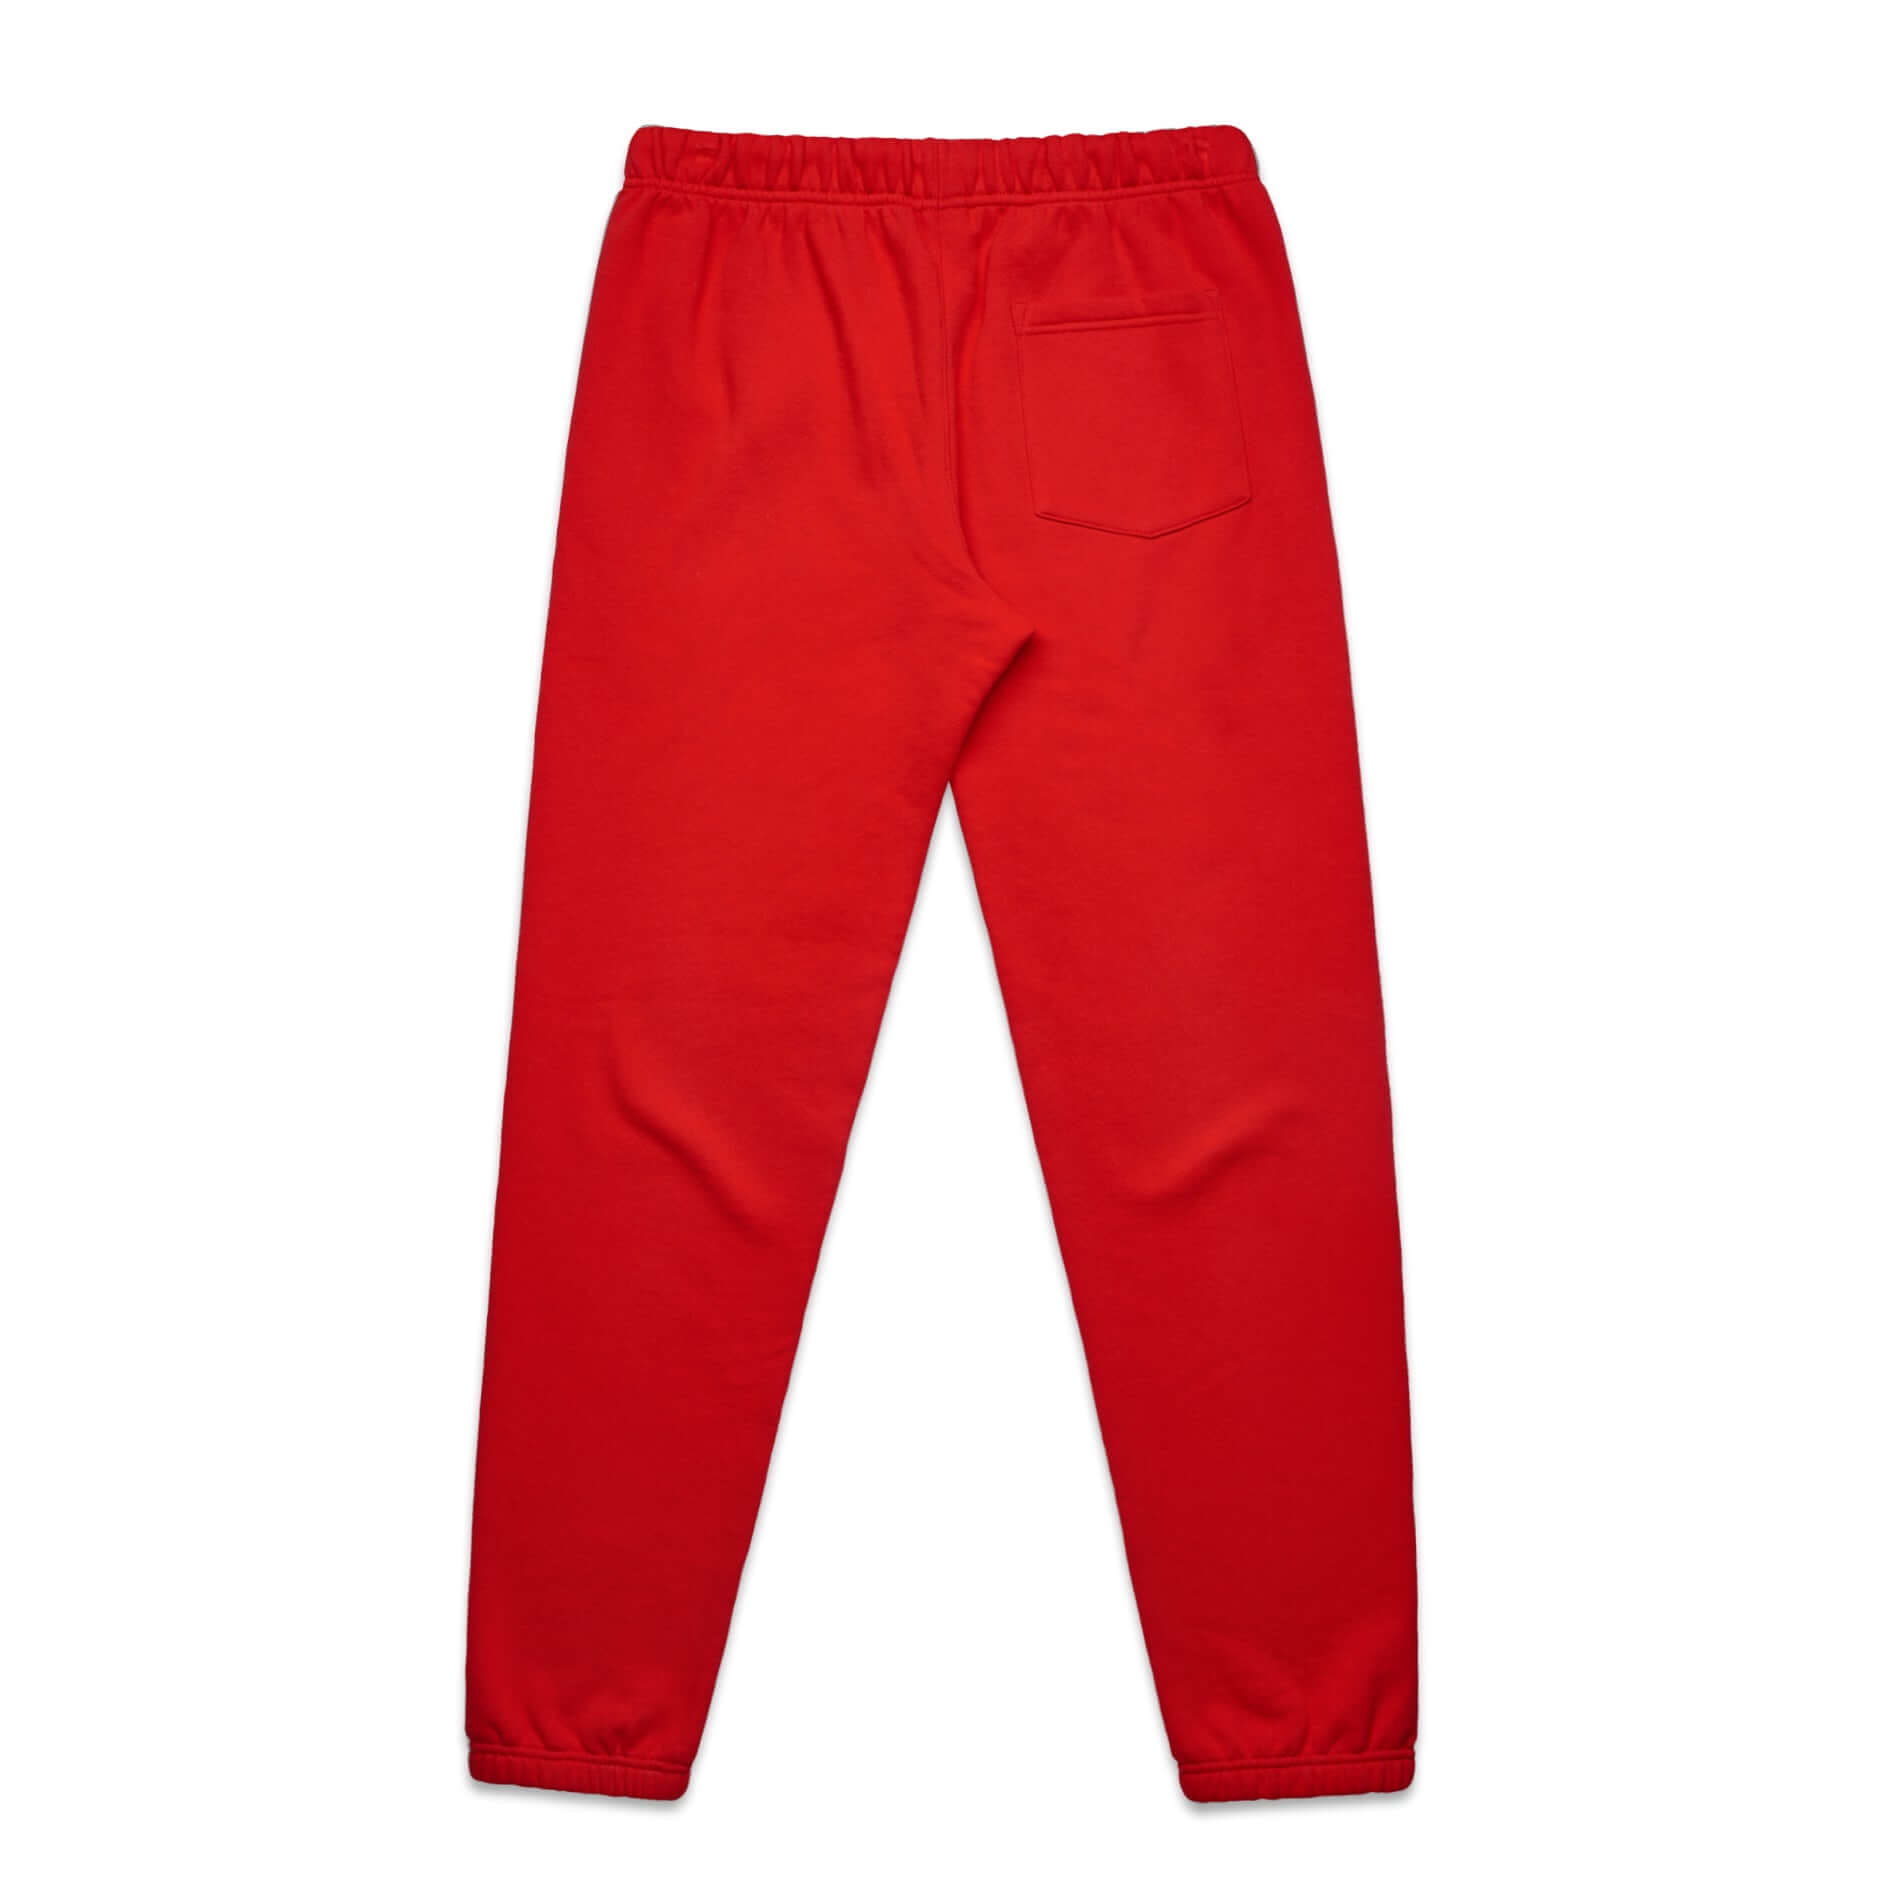 AS Colour SURPLUS TRACK PANT - Red